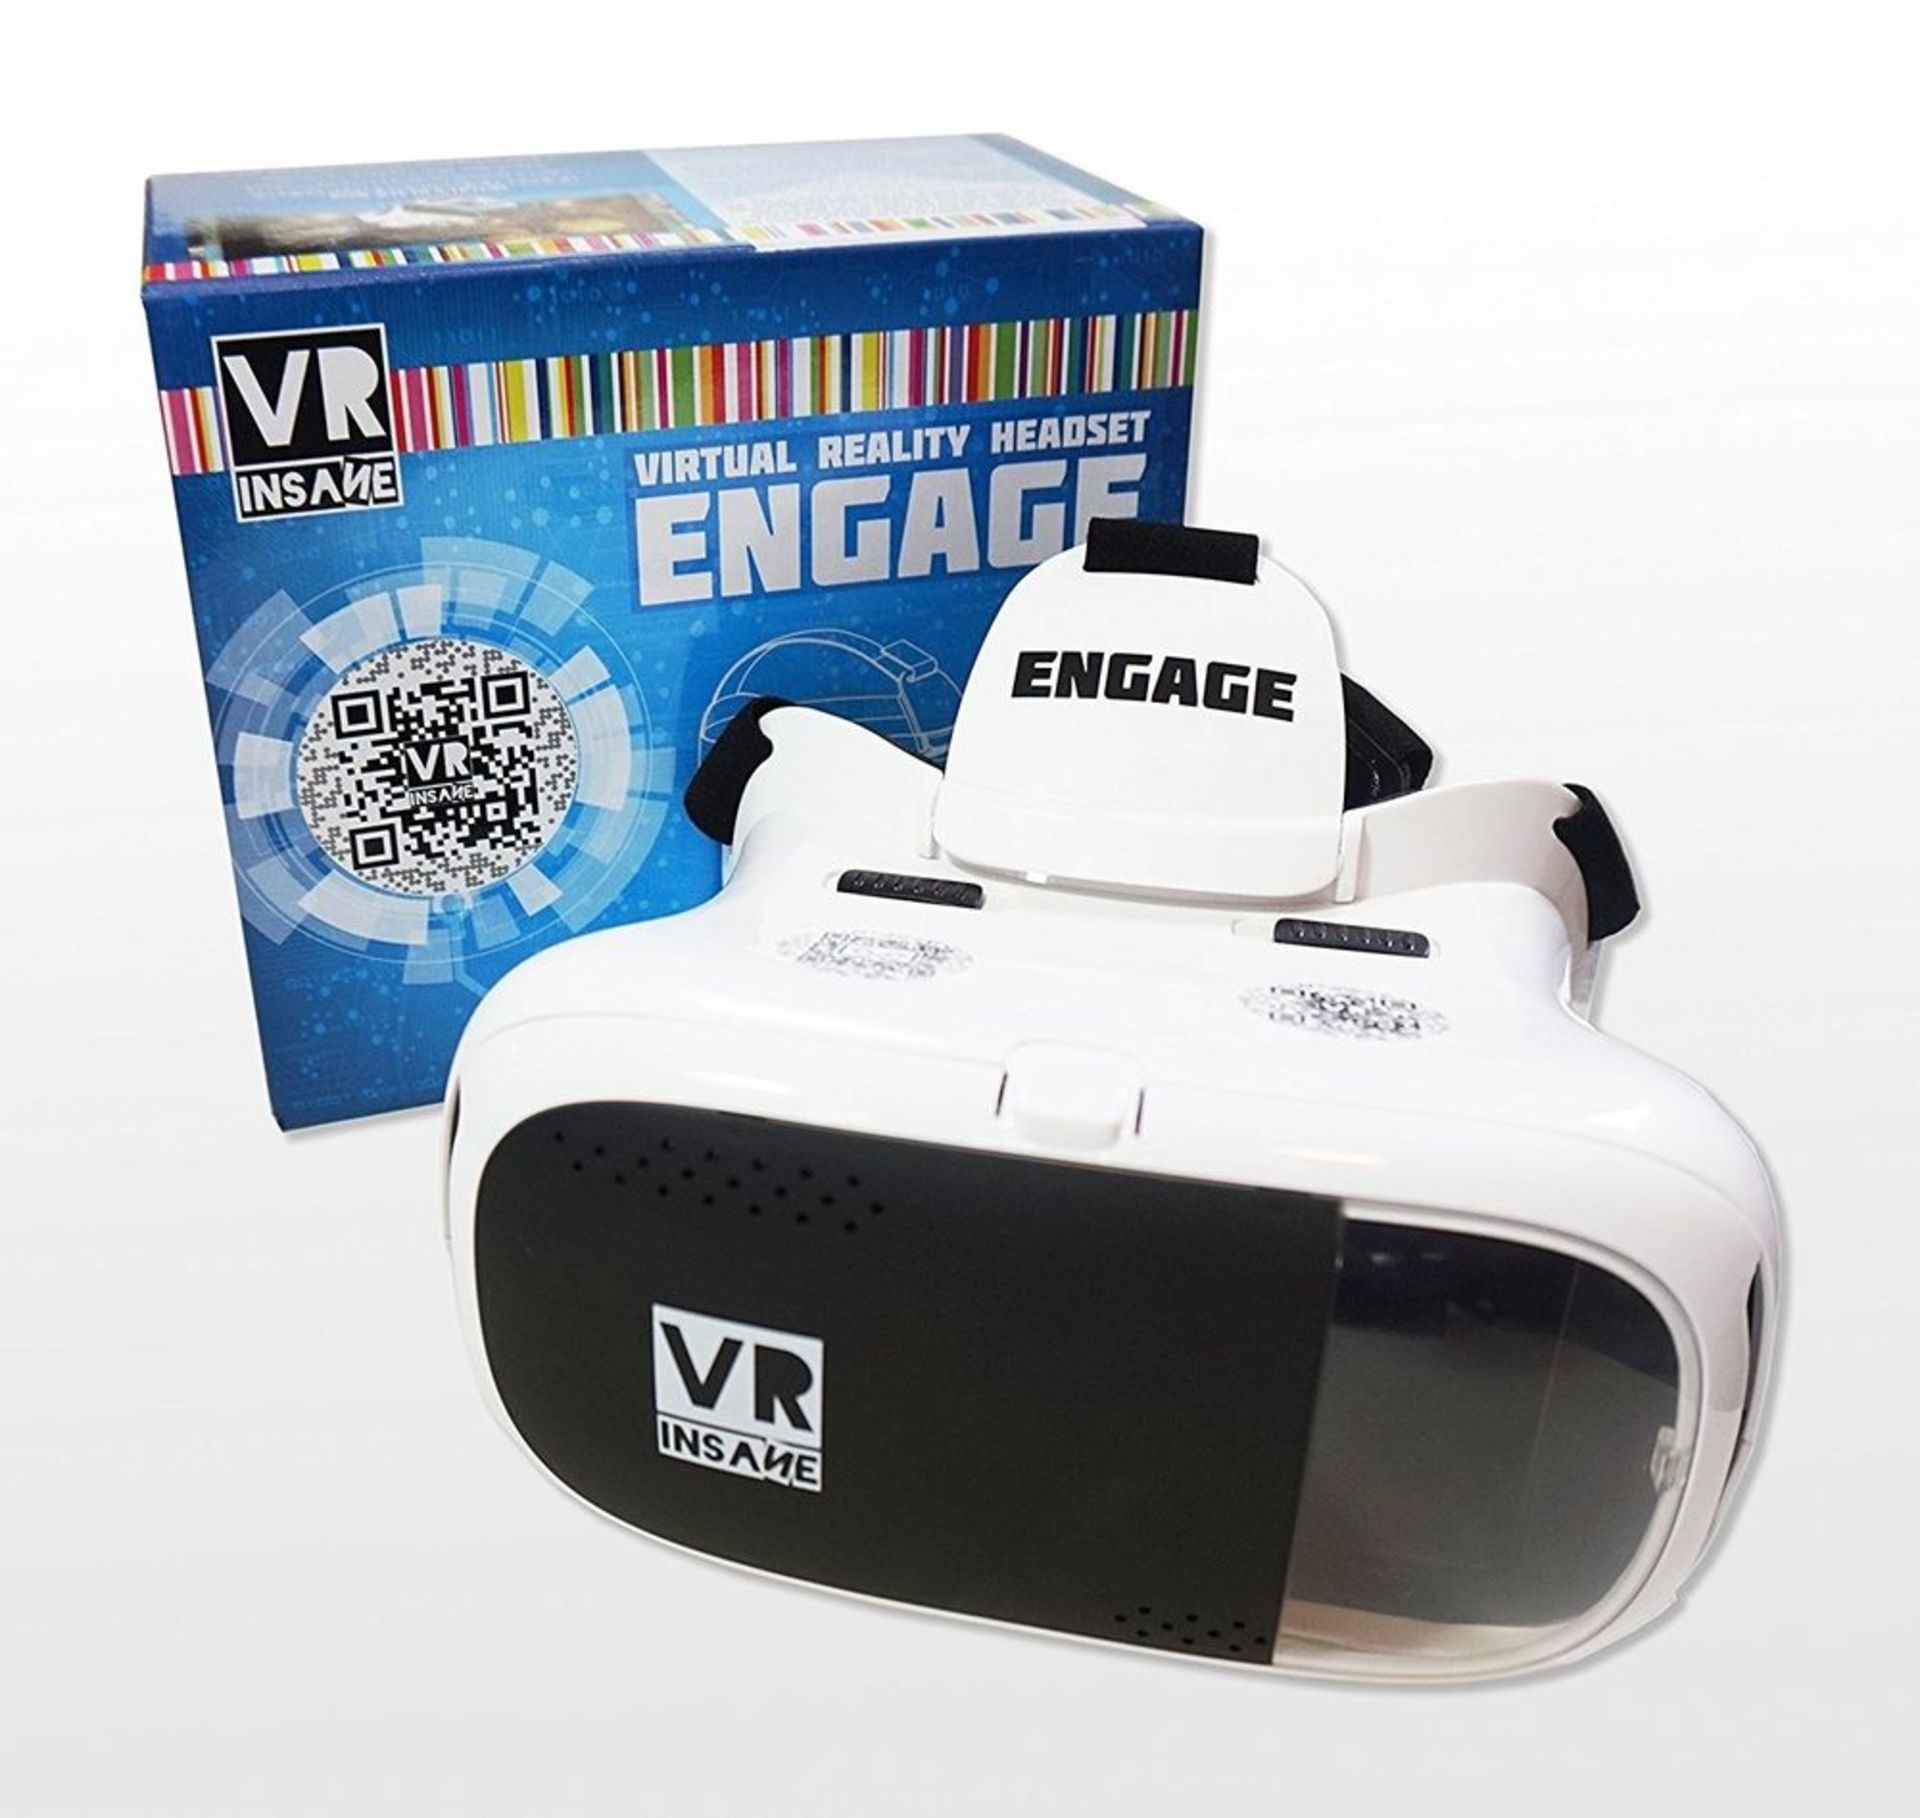 V Brand New Engage Virtual Reality Headset With Adjustable Lenses - Spectacle Friendly - Air - Image 2 of 2